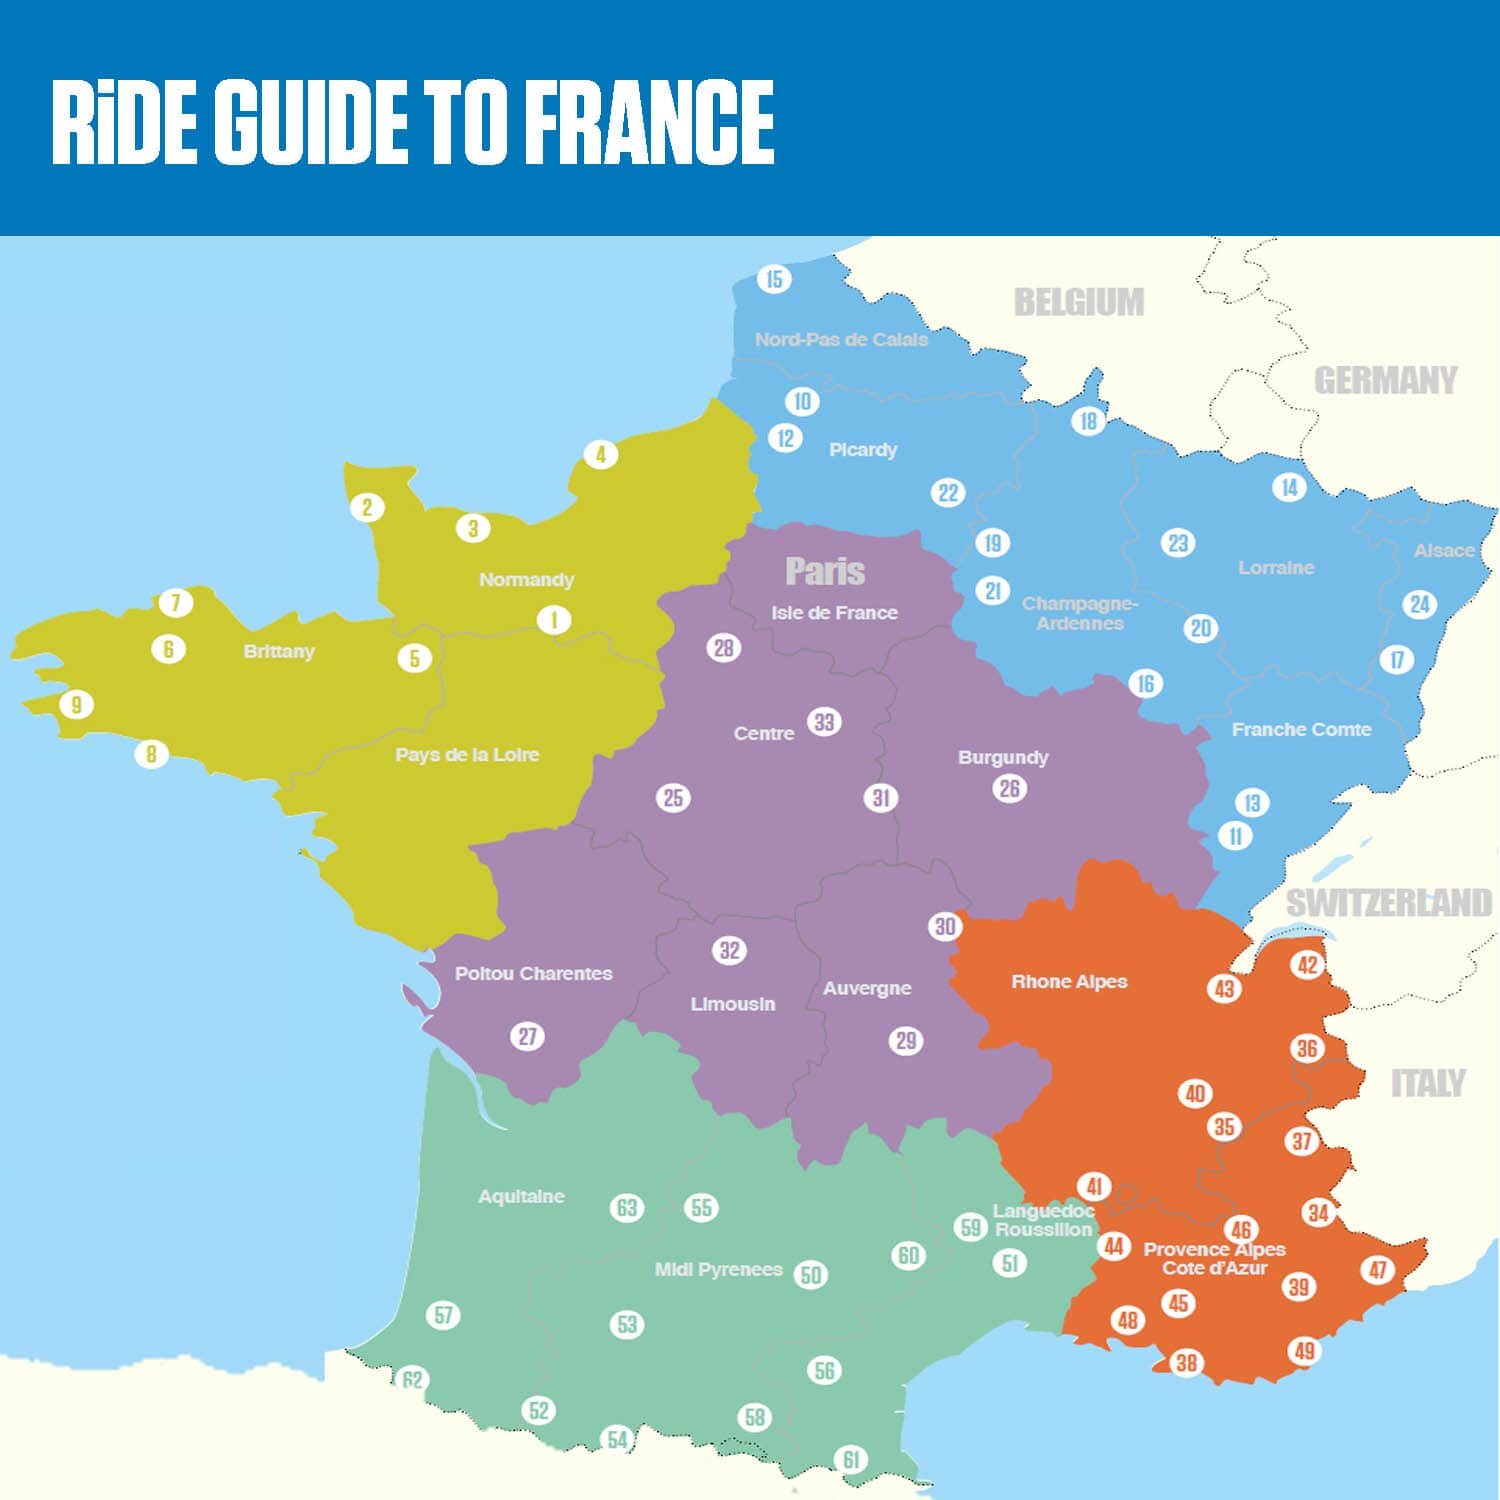 RiDE Guide to motorcycle touring in France